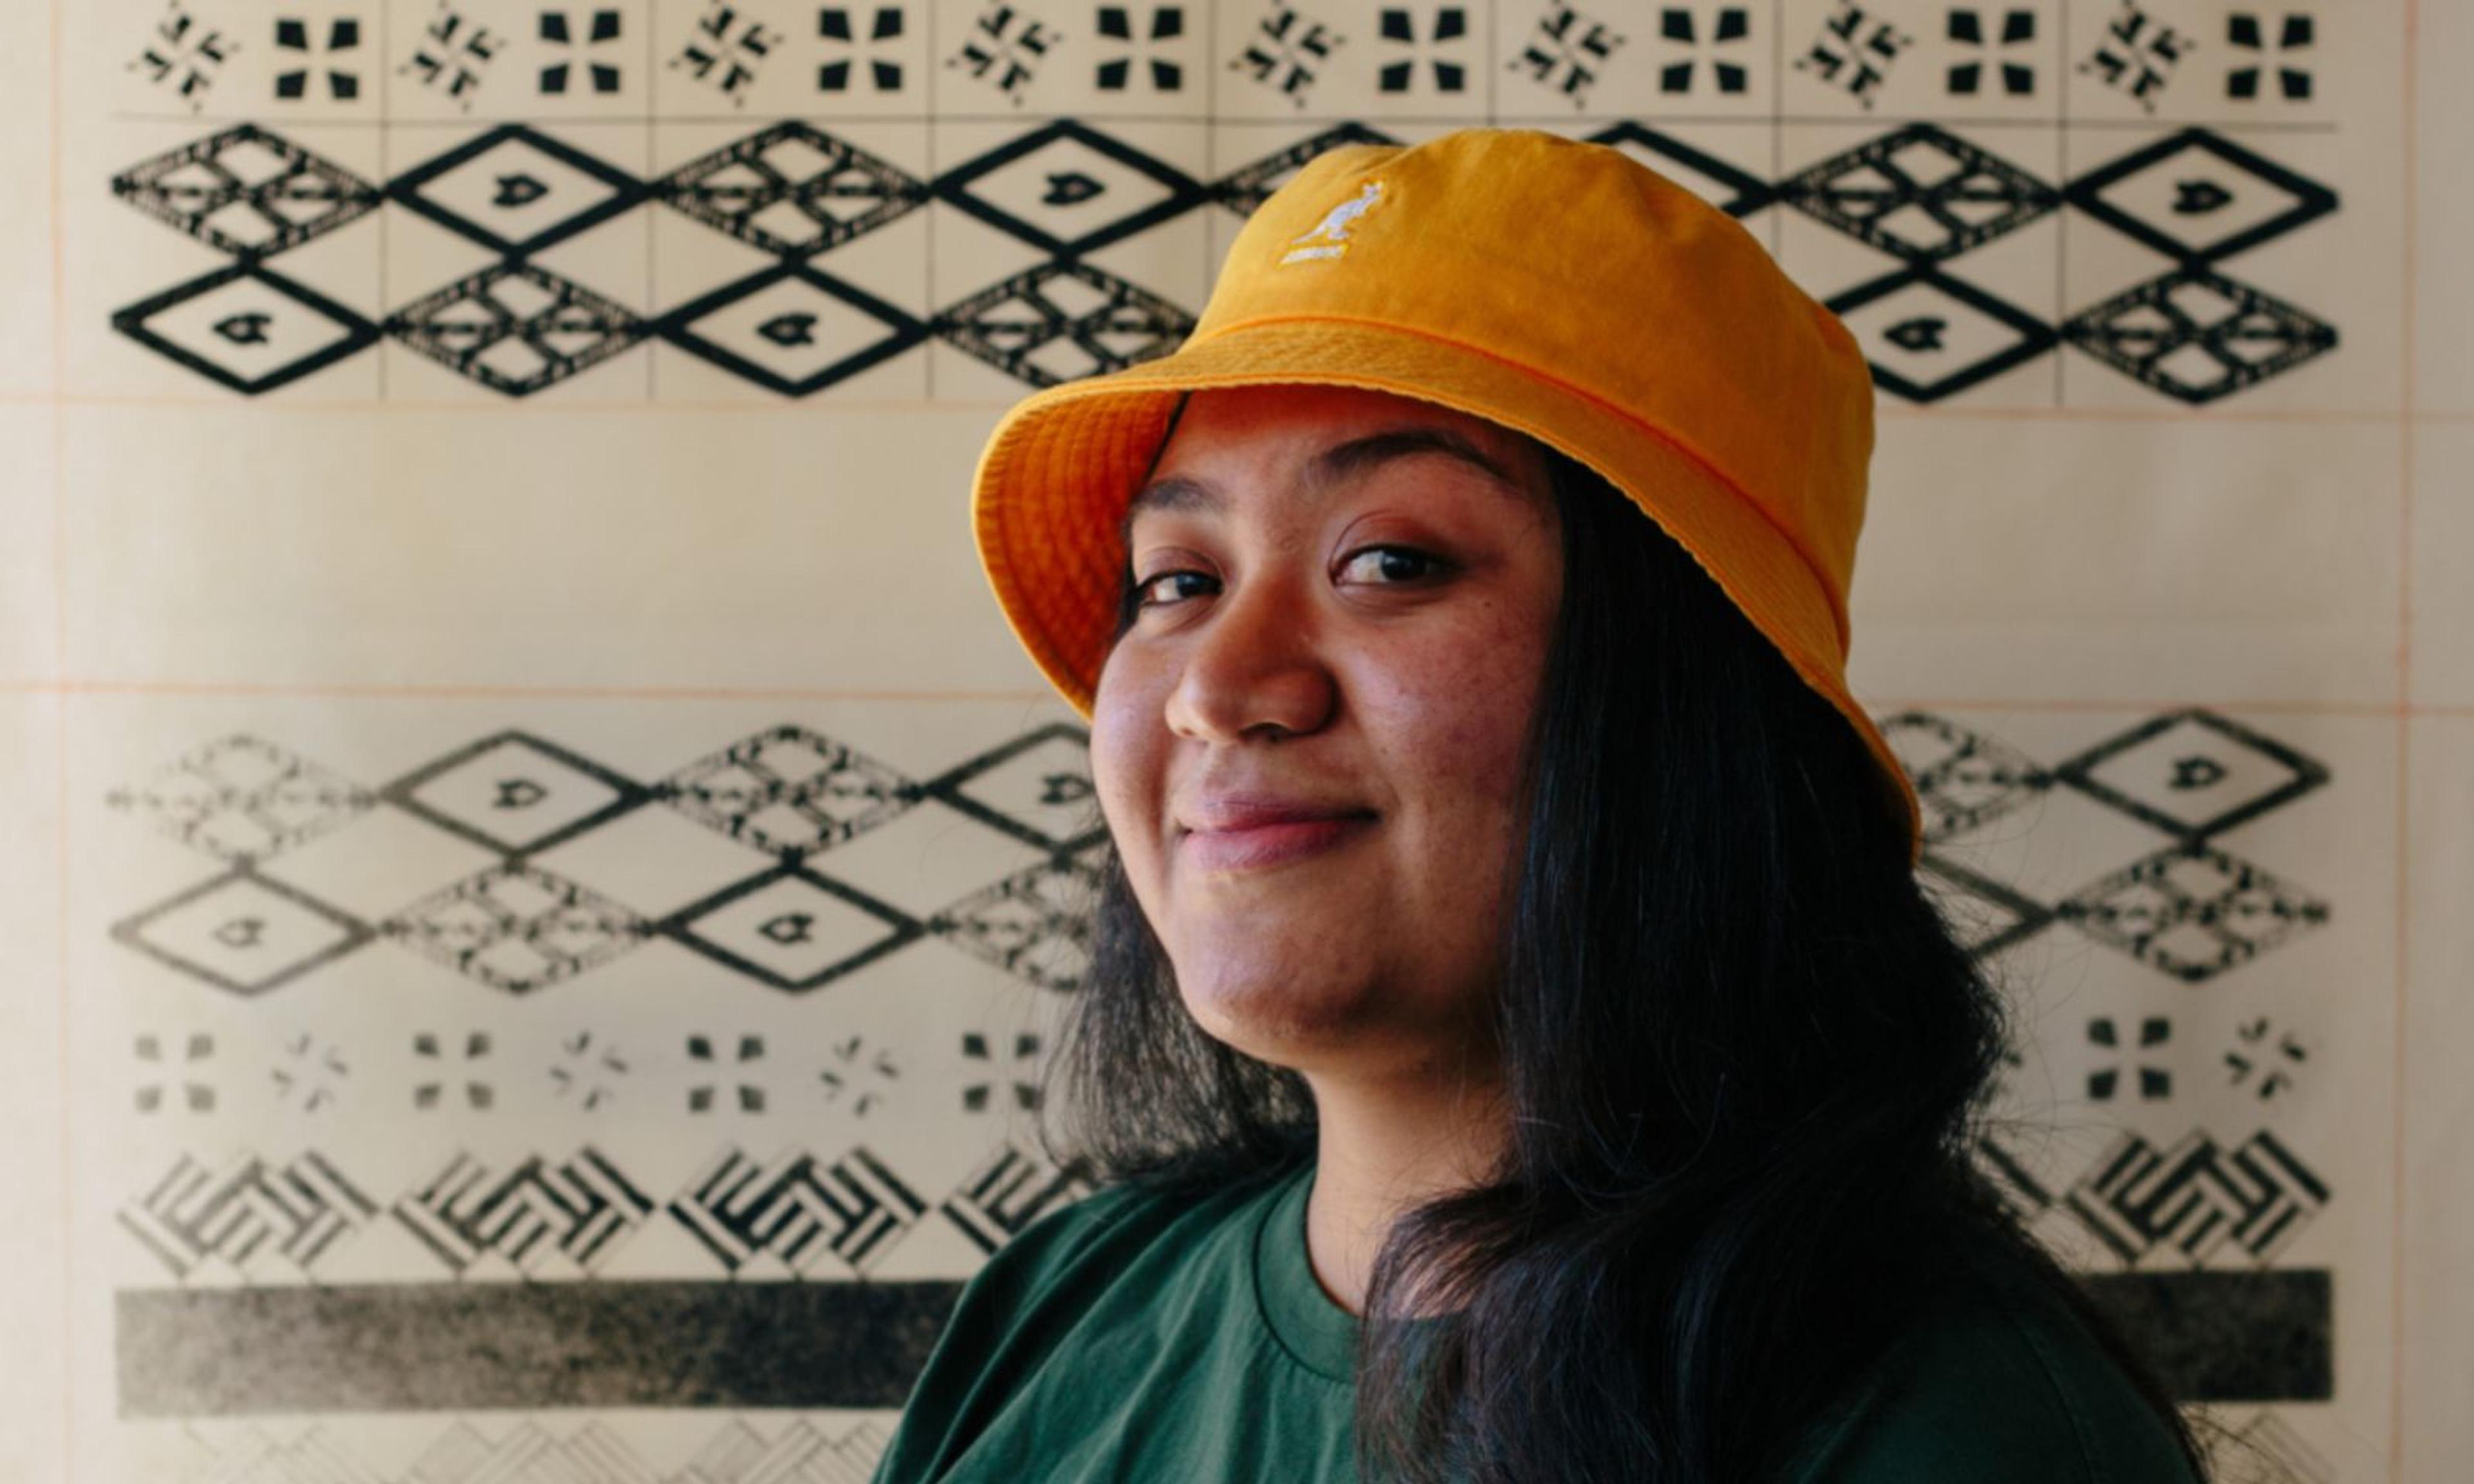 Multi-disciplinary and visual artist 'Uhila Moe Langi Nai is studying towards a PhD in Visual Arts specialising in traditional Tongan Ngatu (tapa cloth) and kupesi (patterned embroidery).